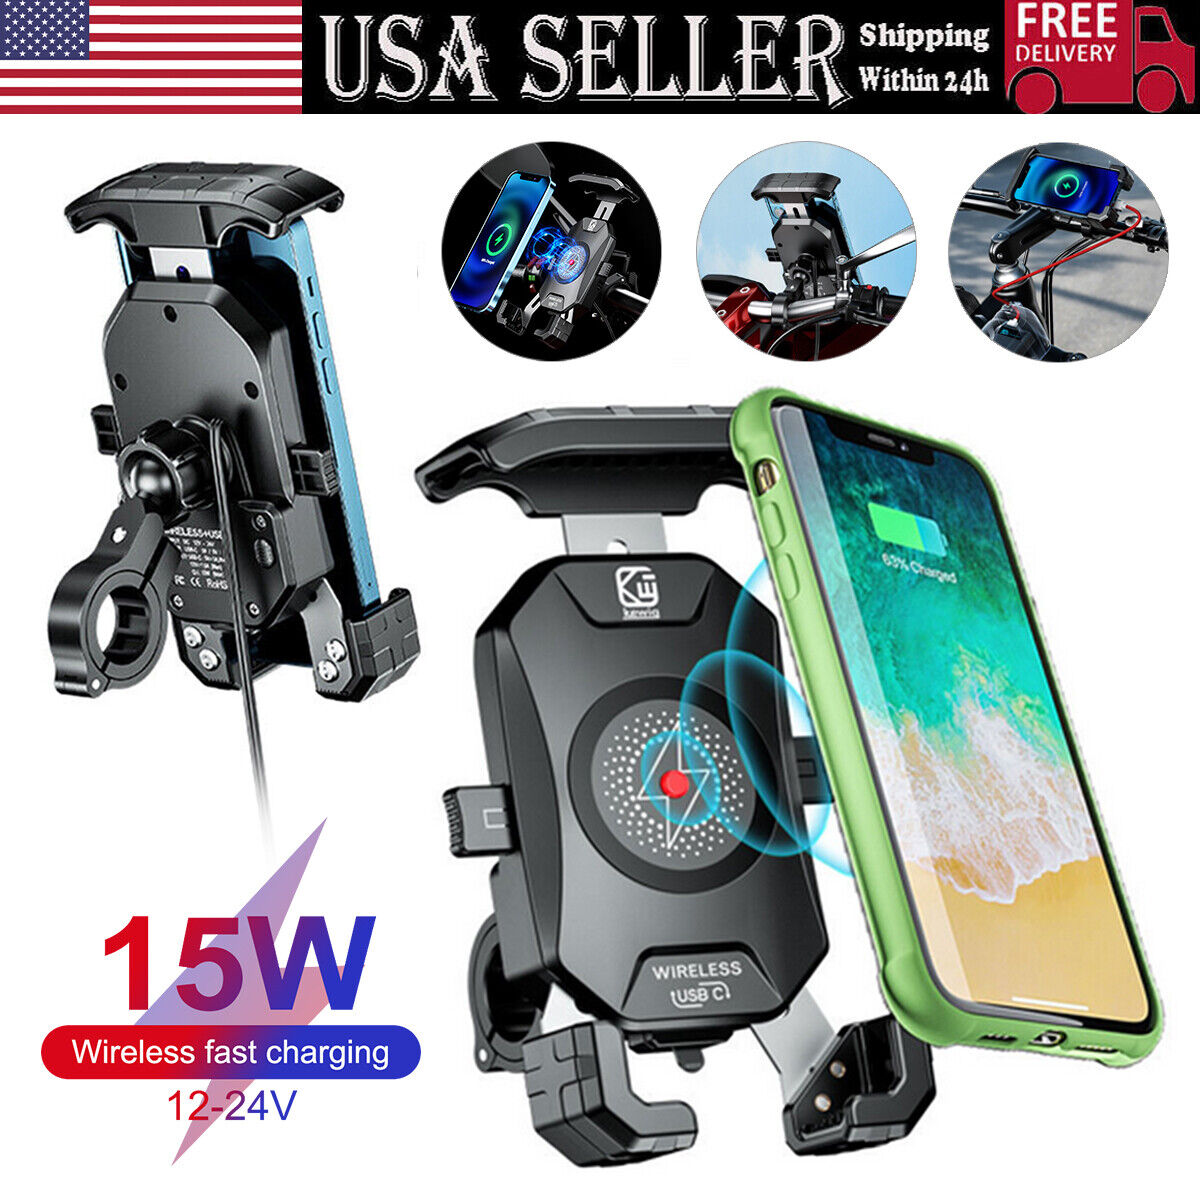 Motorcycle Cell Phone Mount Holder Wireless USB Charger 15W Fast Charging NEW